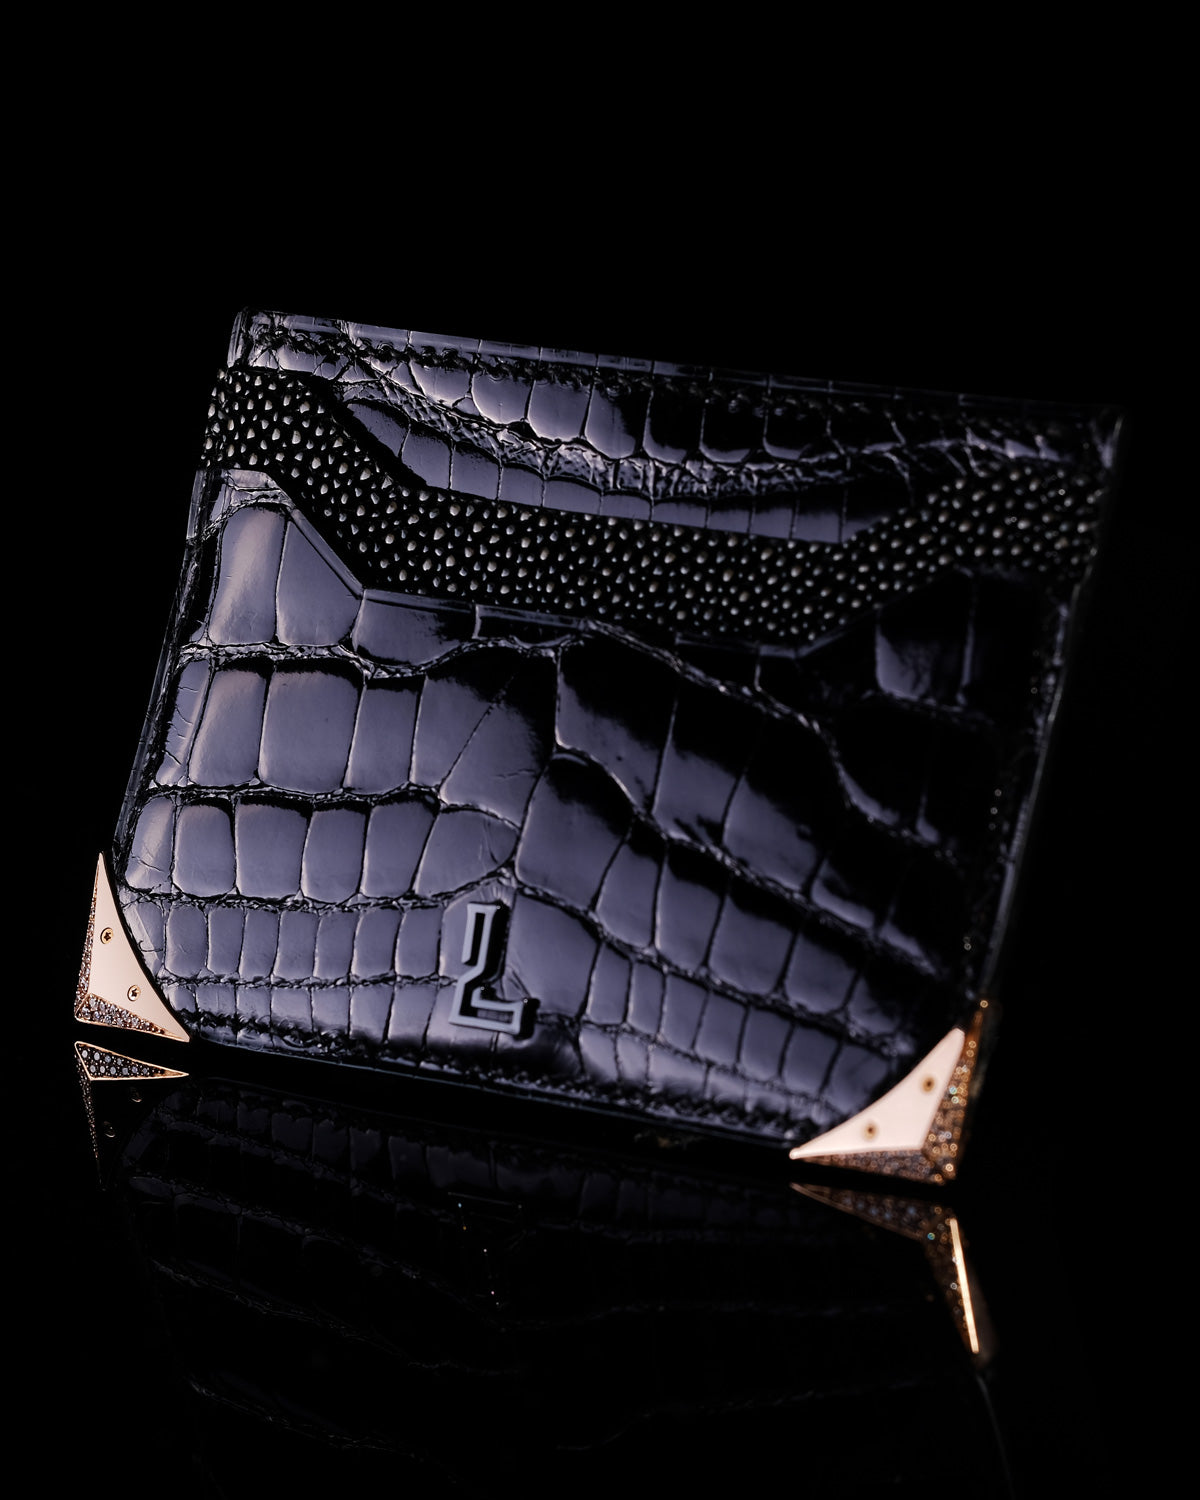 Buy Custom Made Exotic Leather Card Wallets, made to order from